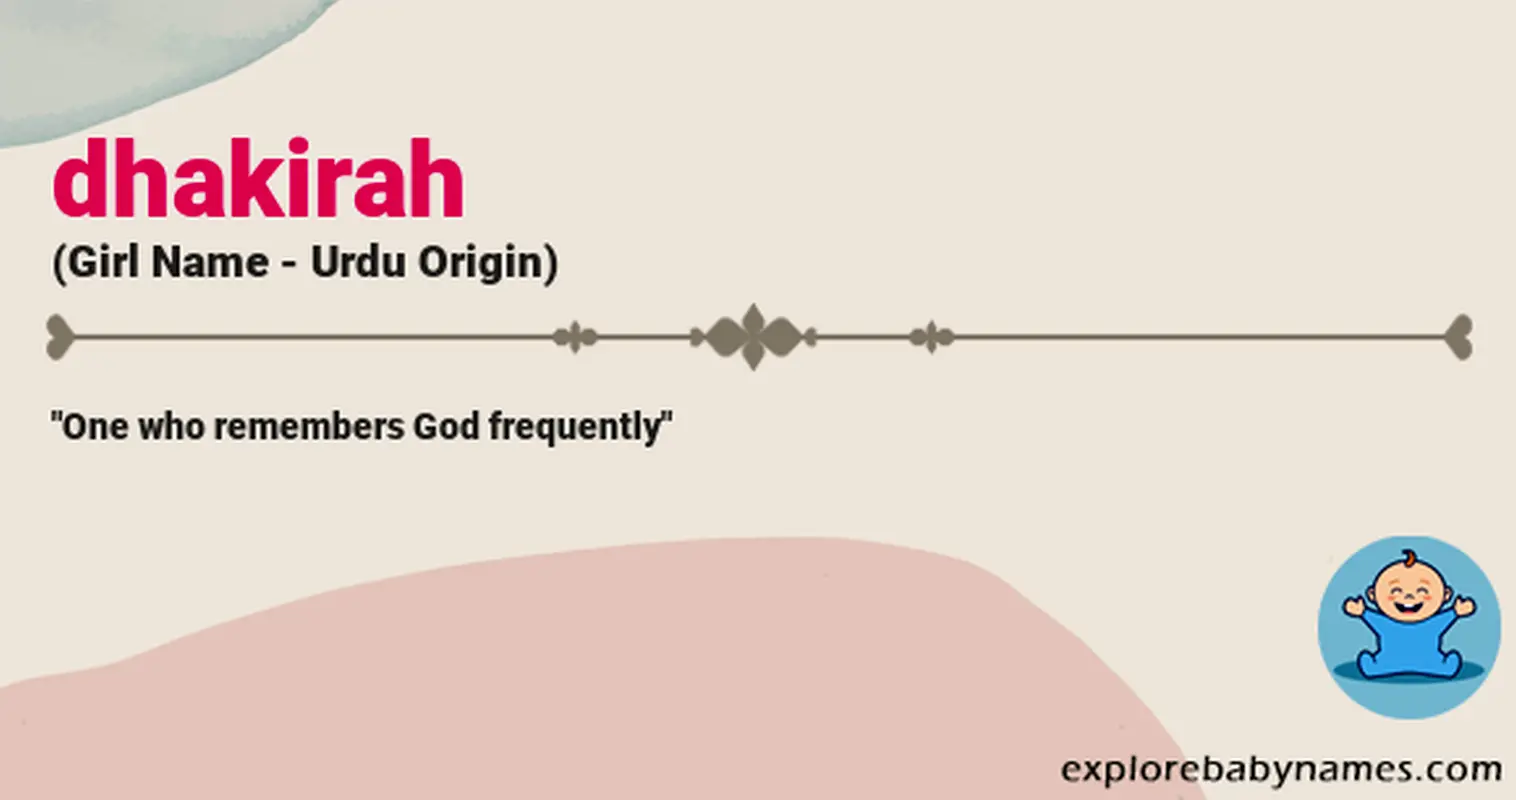 Meaning of Dhakirah